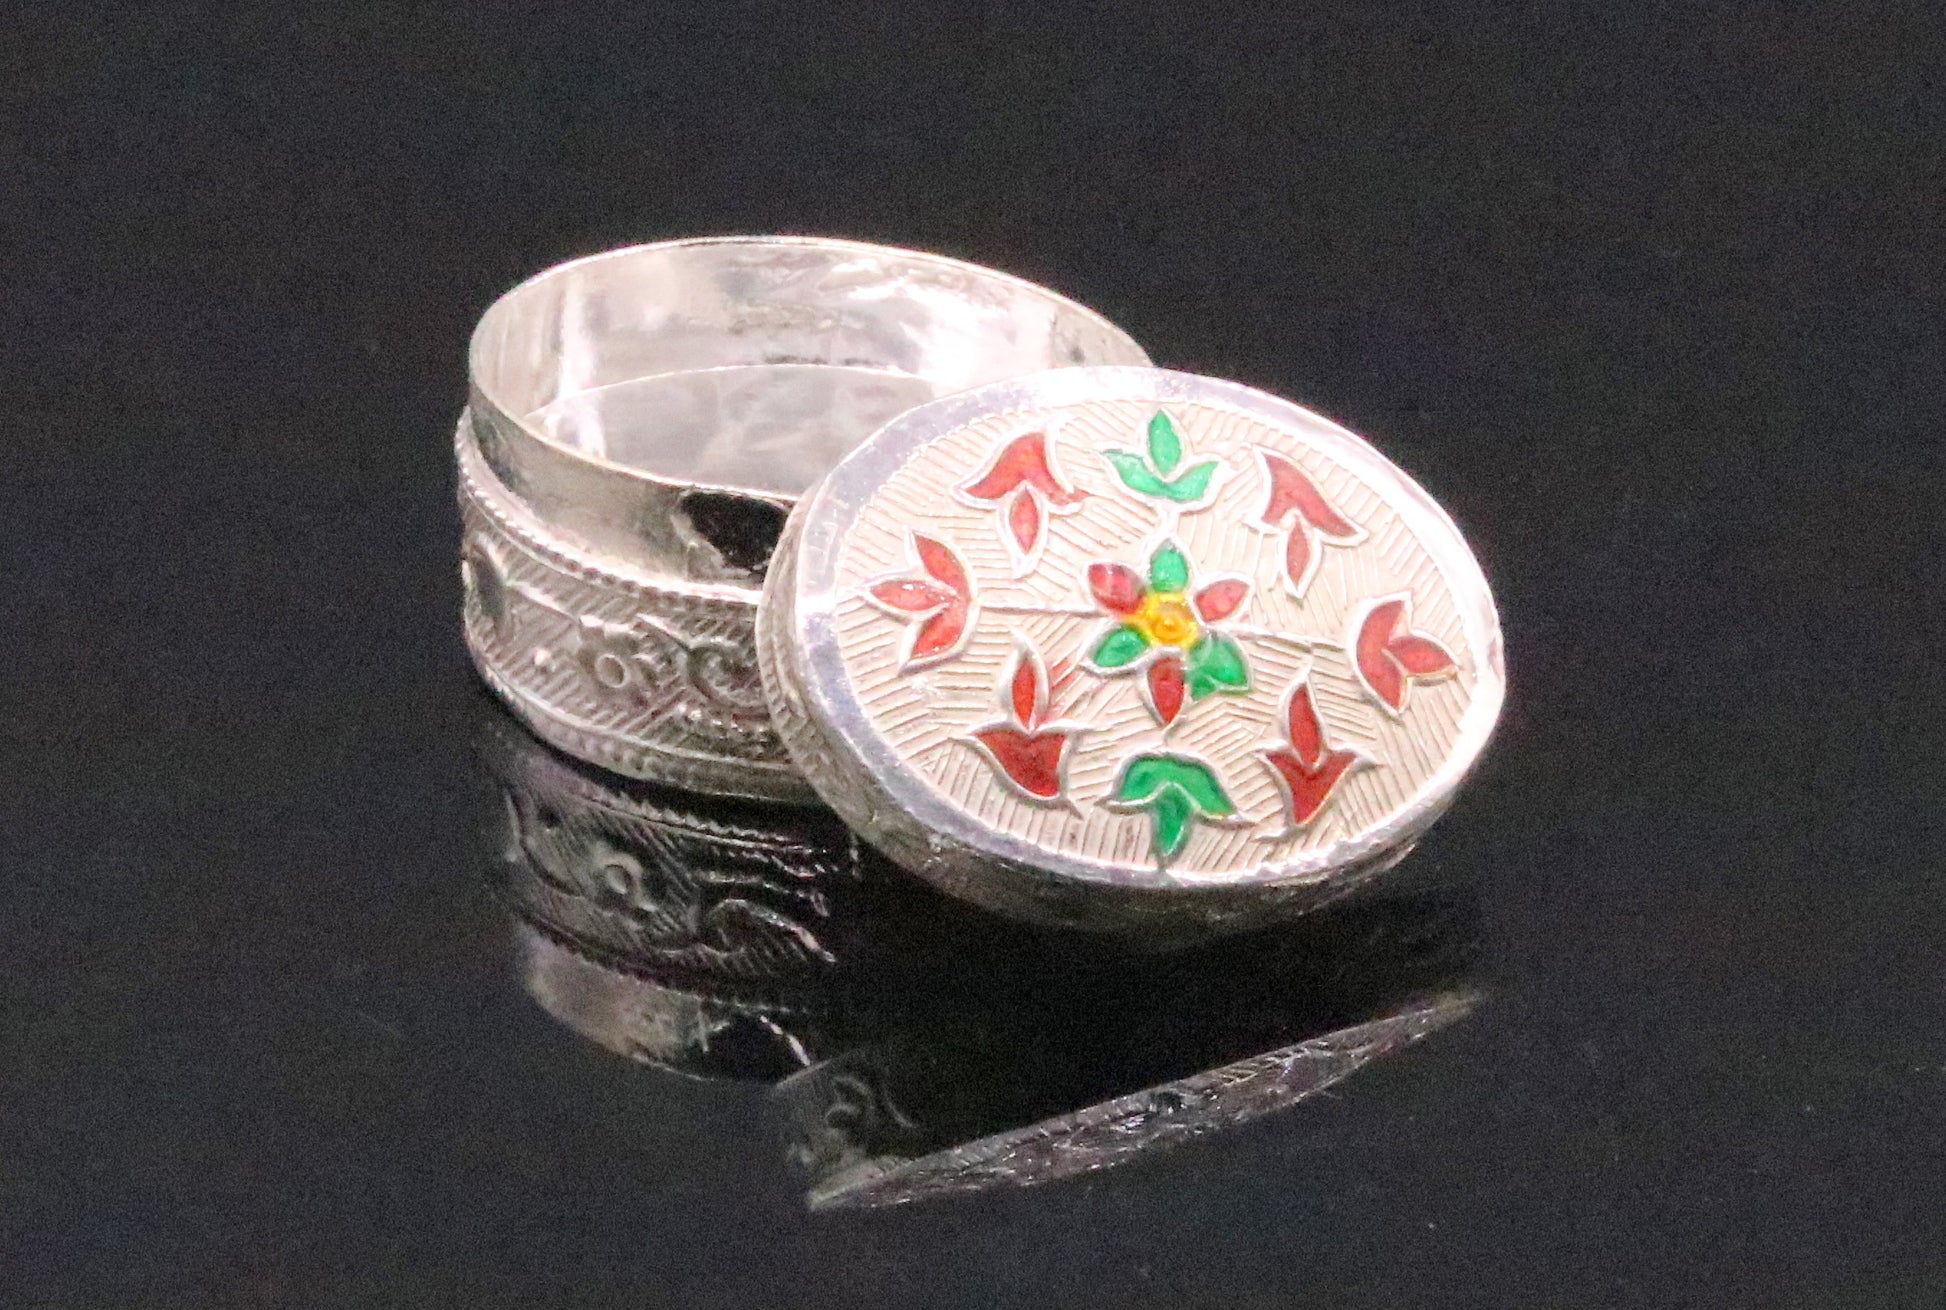 Handmade 925 sterling silver solid trinket box casket box container cigar box color enamel collectible pieces trnk09 - TRIBAL ORNAMENTS